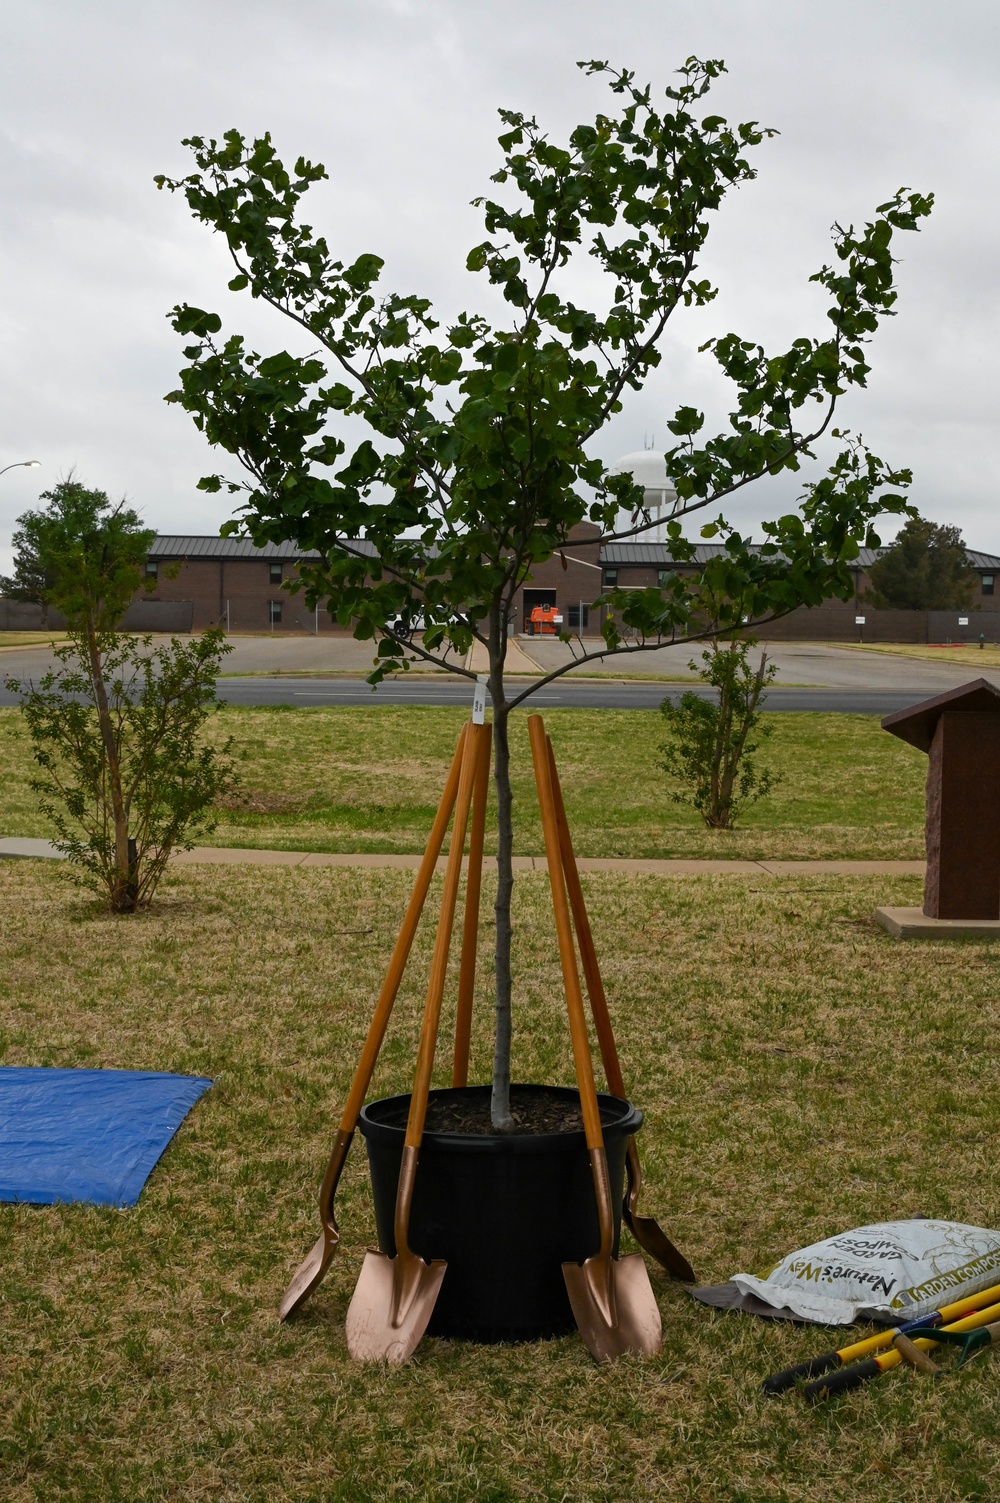 State tree planted to commemorate AAFB history